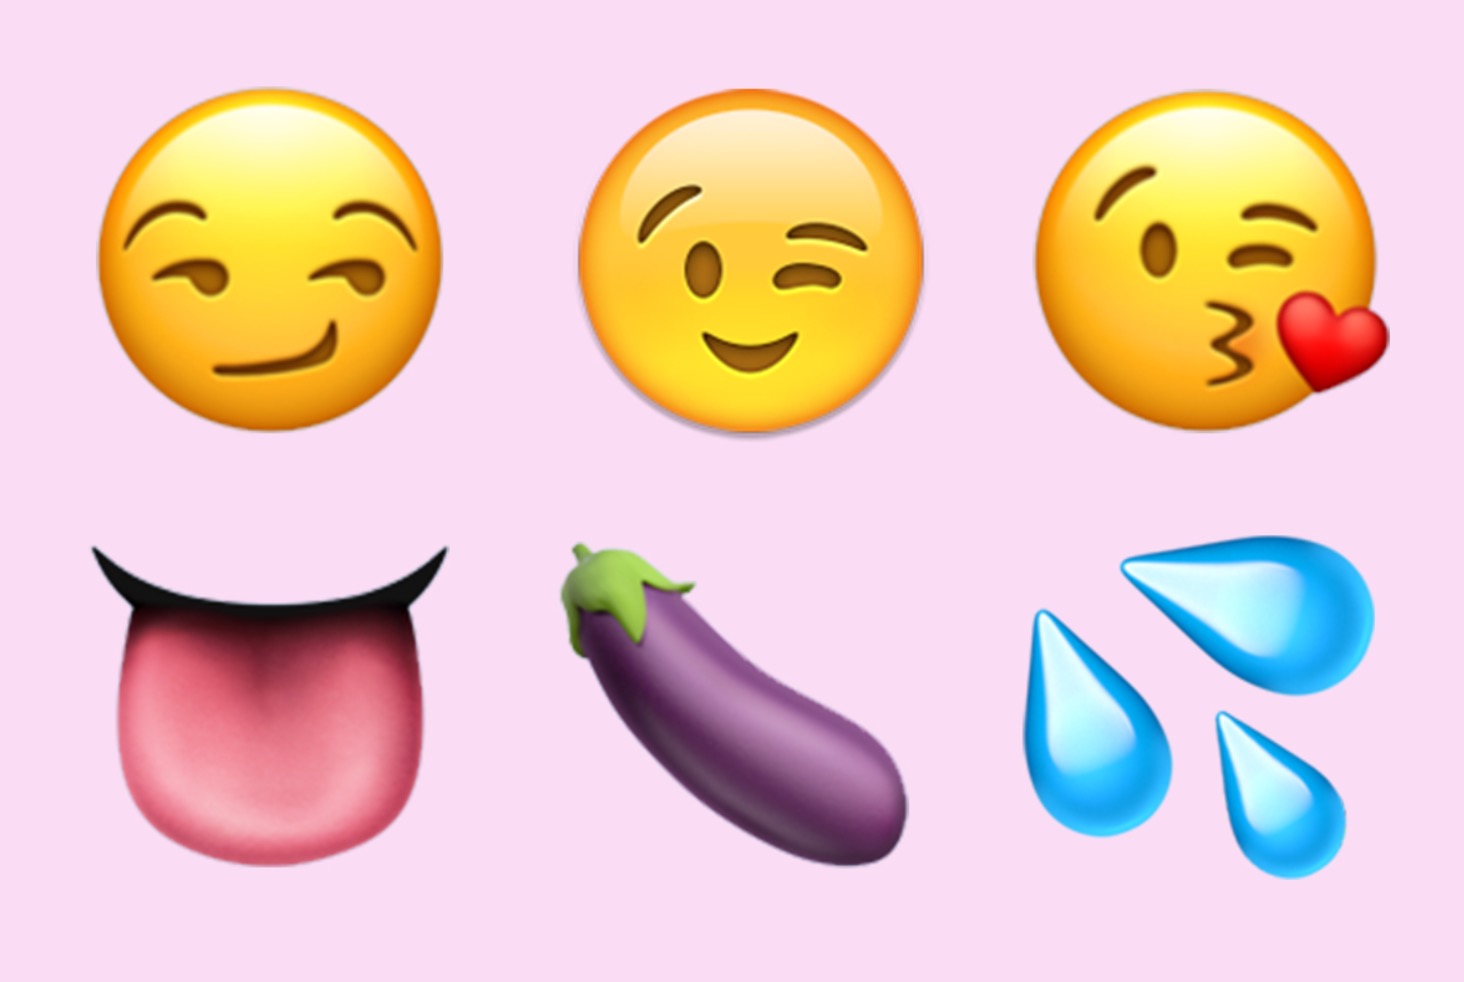 Platforms are cutting down on "sexual" emojis.